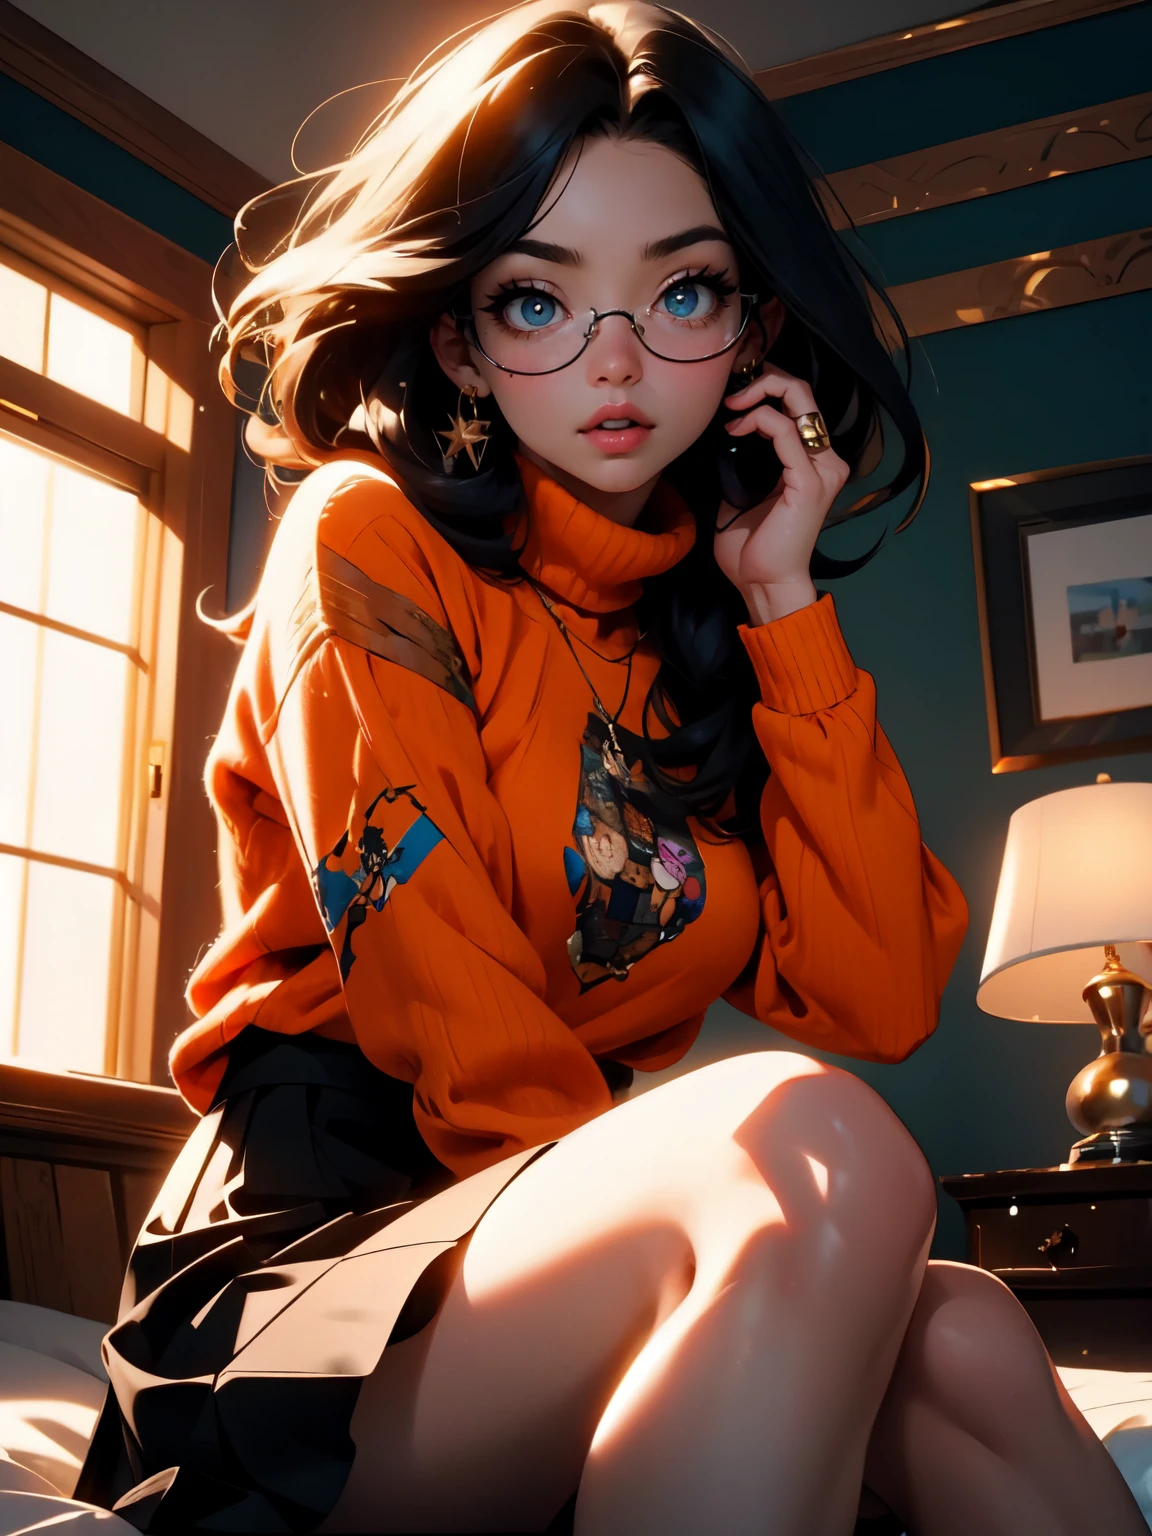 HD, 8k quality, masterpiece, Velma, dream girl huge , beautiful face, kissing lips, bob hairstyle, long bangs, perfect makeup, realistic face, detailed eyes, blue eyes, brunette hair, eyelashes, slightly open mouth, bedroom, sitting on bed, showing cameltoe, eyes at viewer, orange knitted turtle neck sweater, clear lens glasses, red school girl skirt,